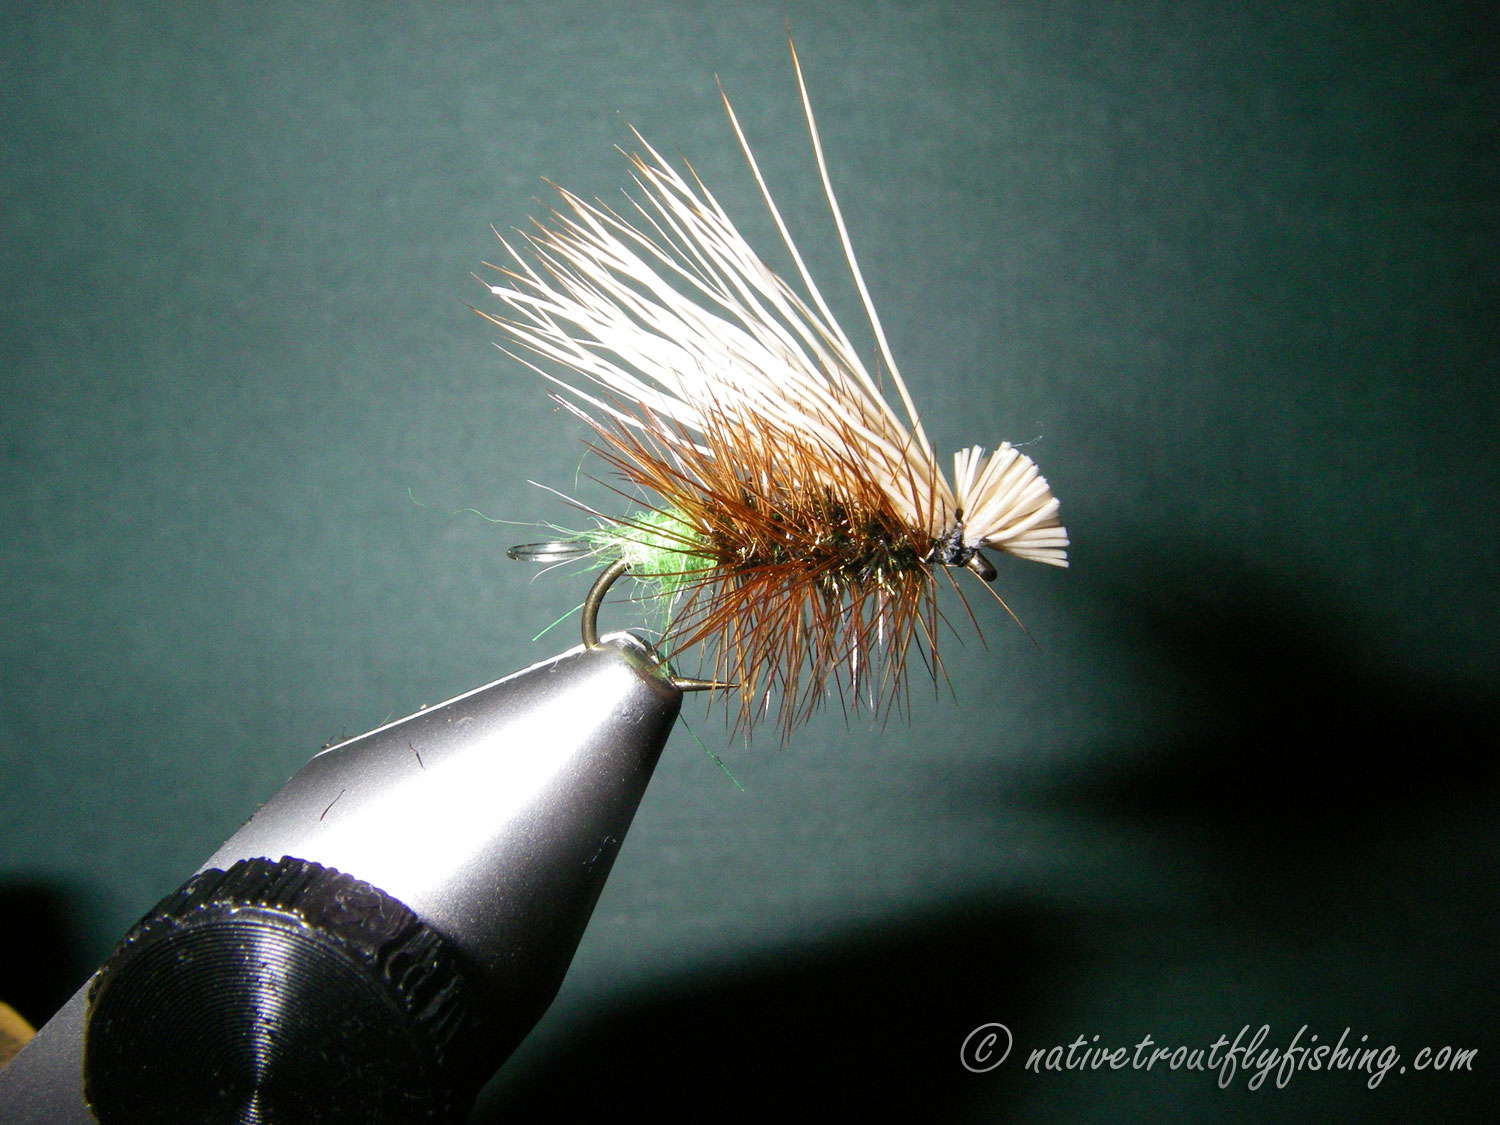 Native Trout Fly Fishing: Hot-Butt Dropper Caddis